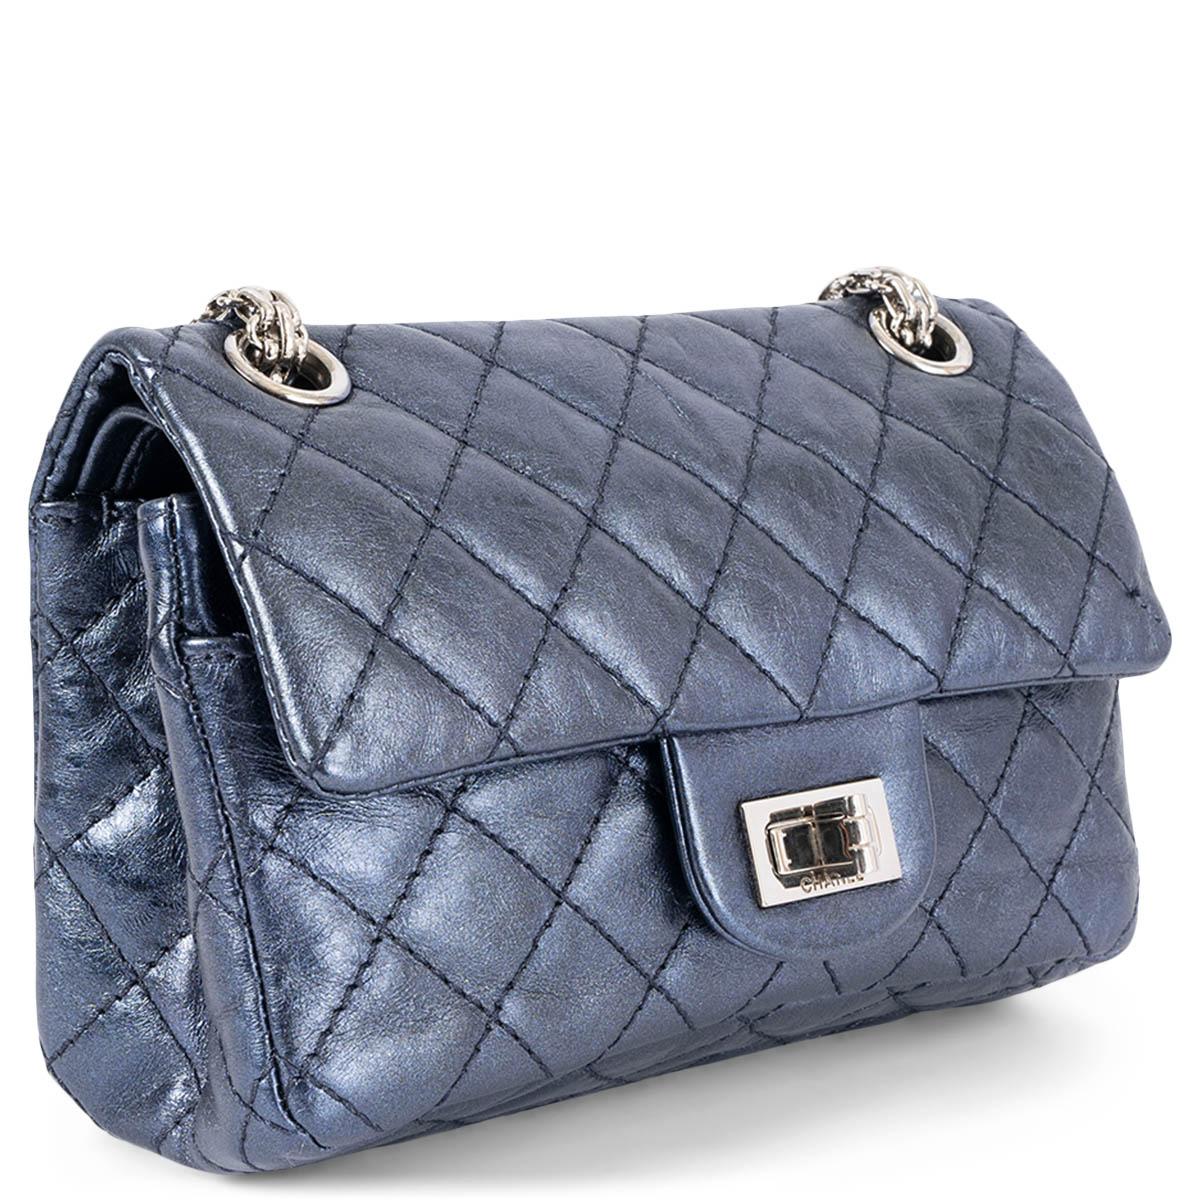 100% authentic Chanel 2.55 Reissue Mini shoulder bag in metallic midnight blue aged calfskin featuring silver-tone hardware. Opens with a classic turn-lock and a flap. Lined in metallic midnight blue smooth calfskin with two patch pockets and one